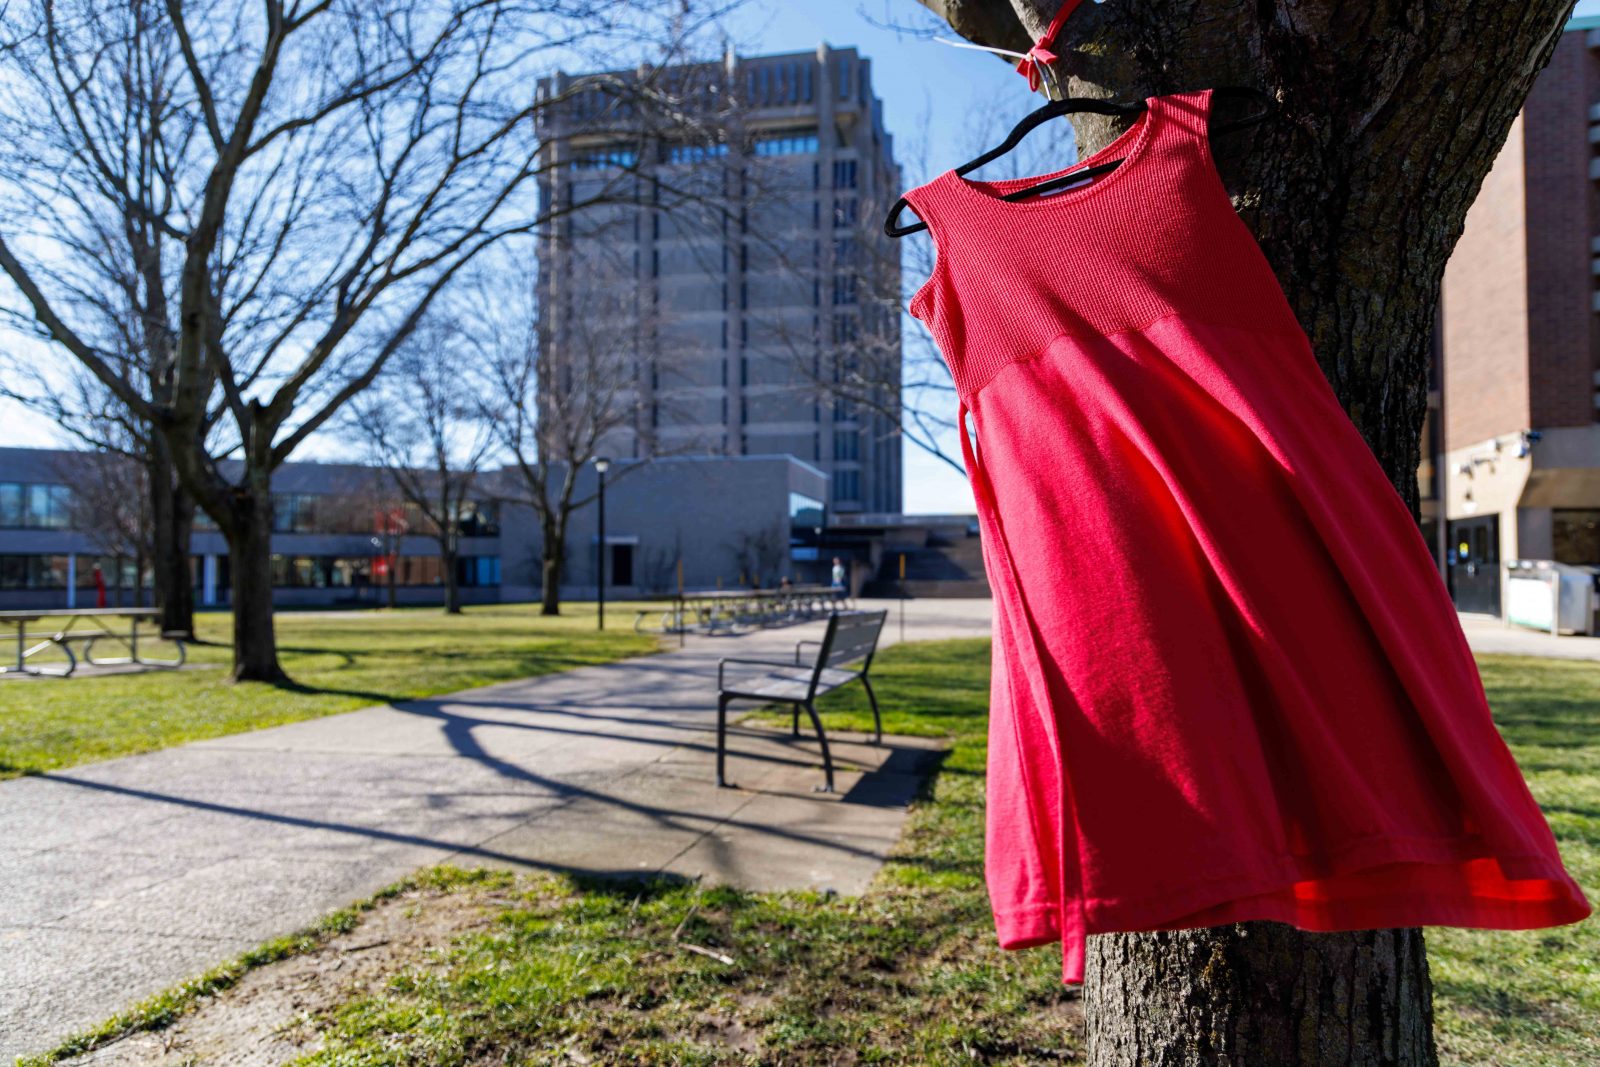 A red dress hangs from a tree with a large building in the background.